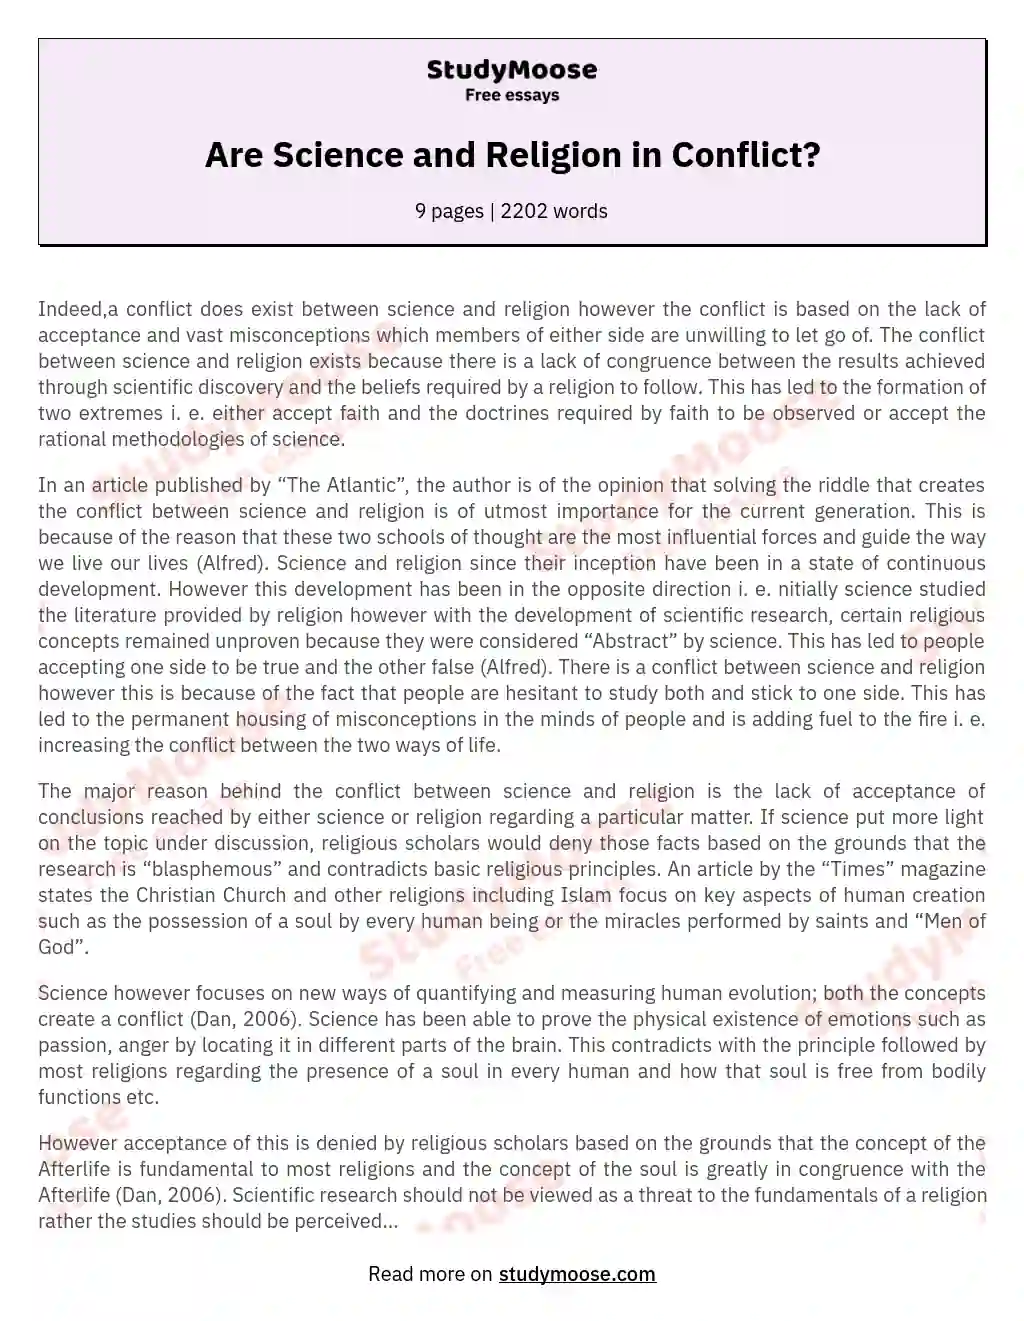 Are Science and Religion in Conflict?